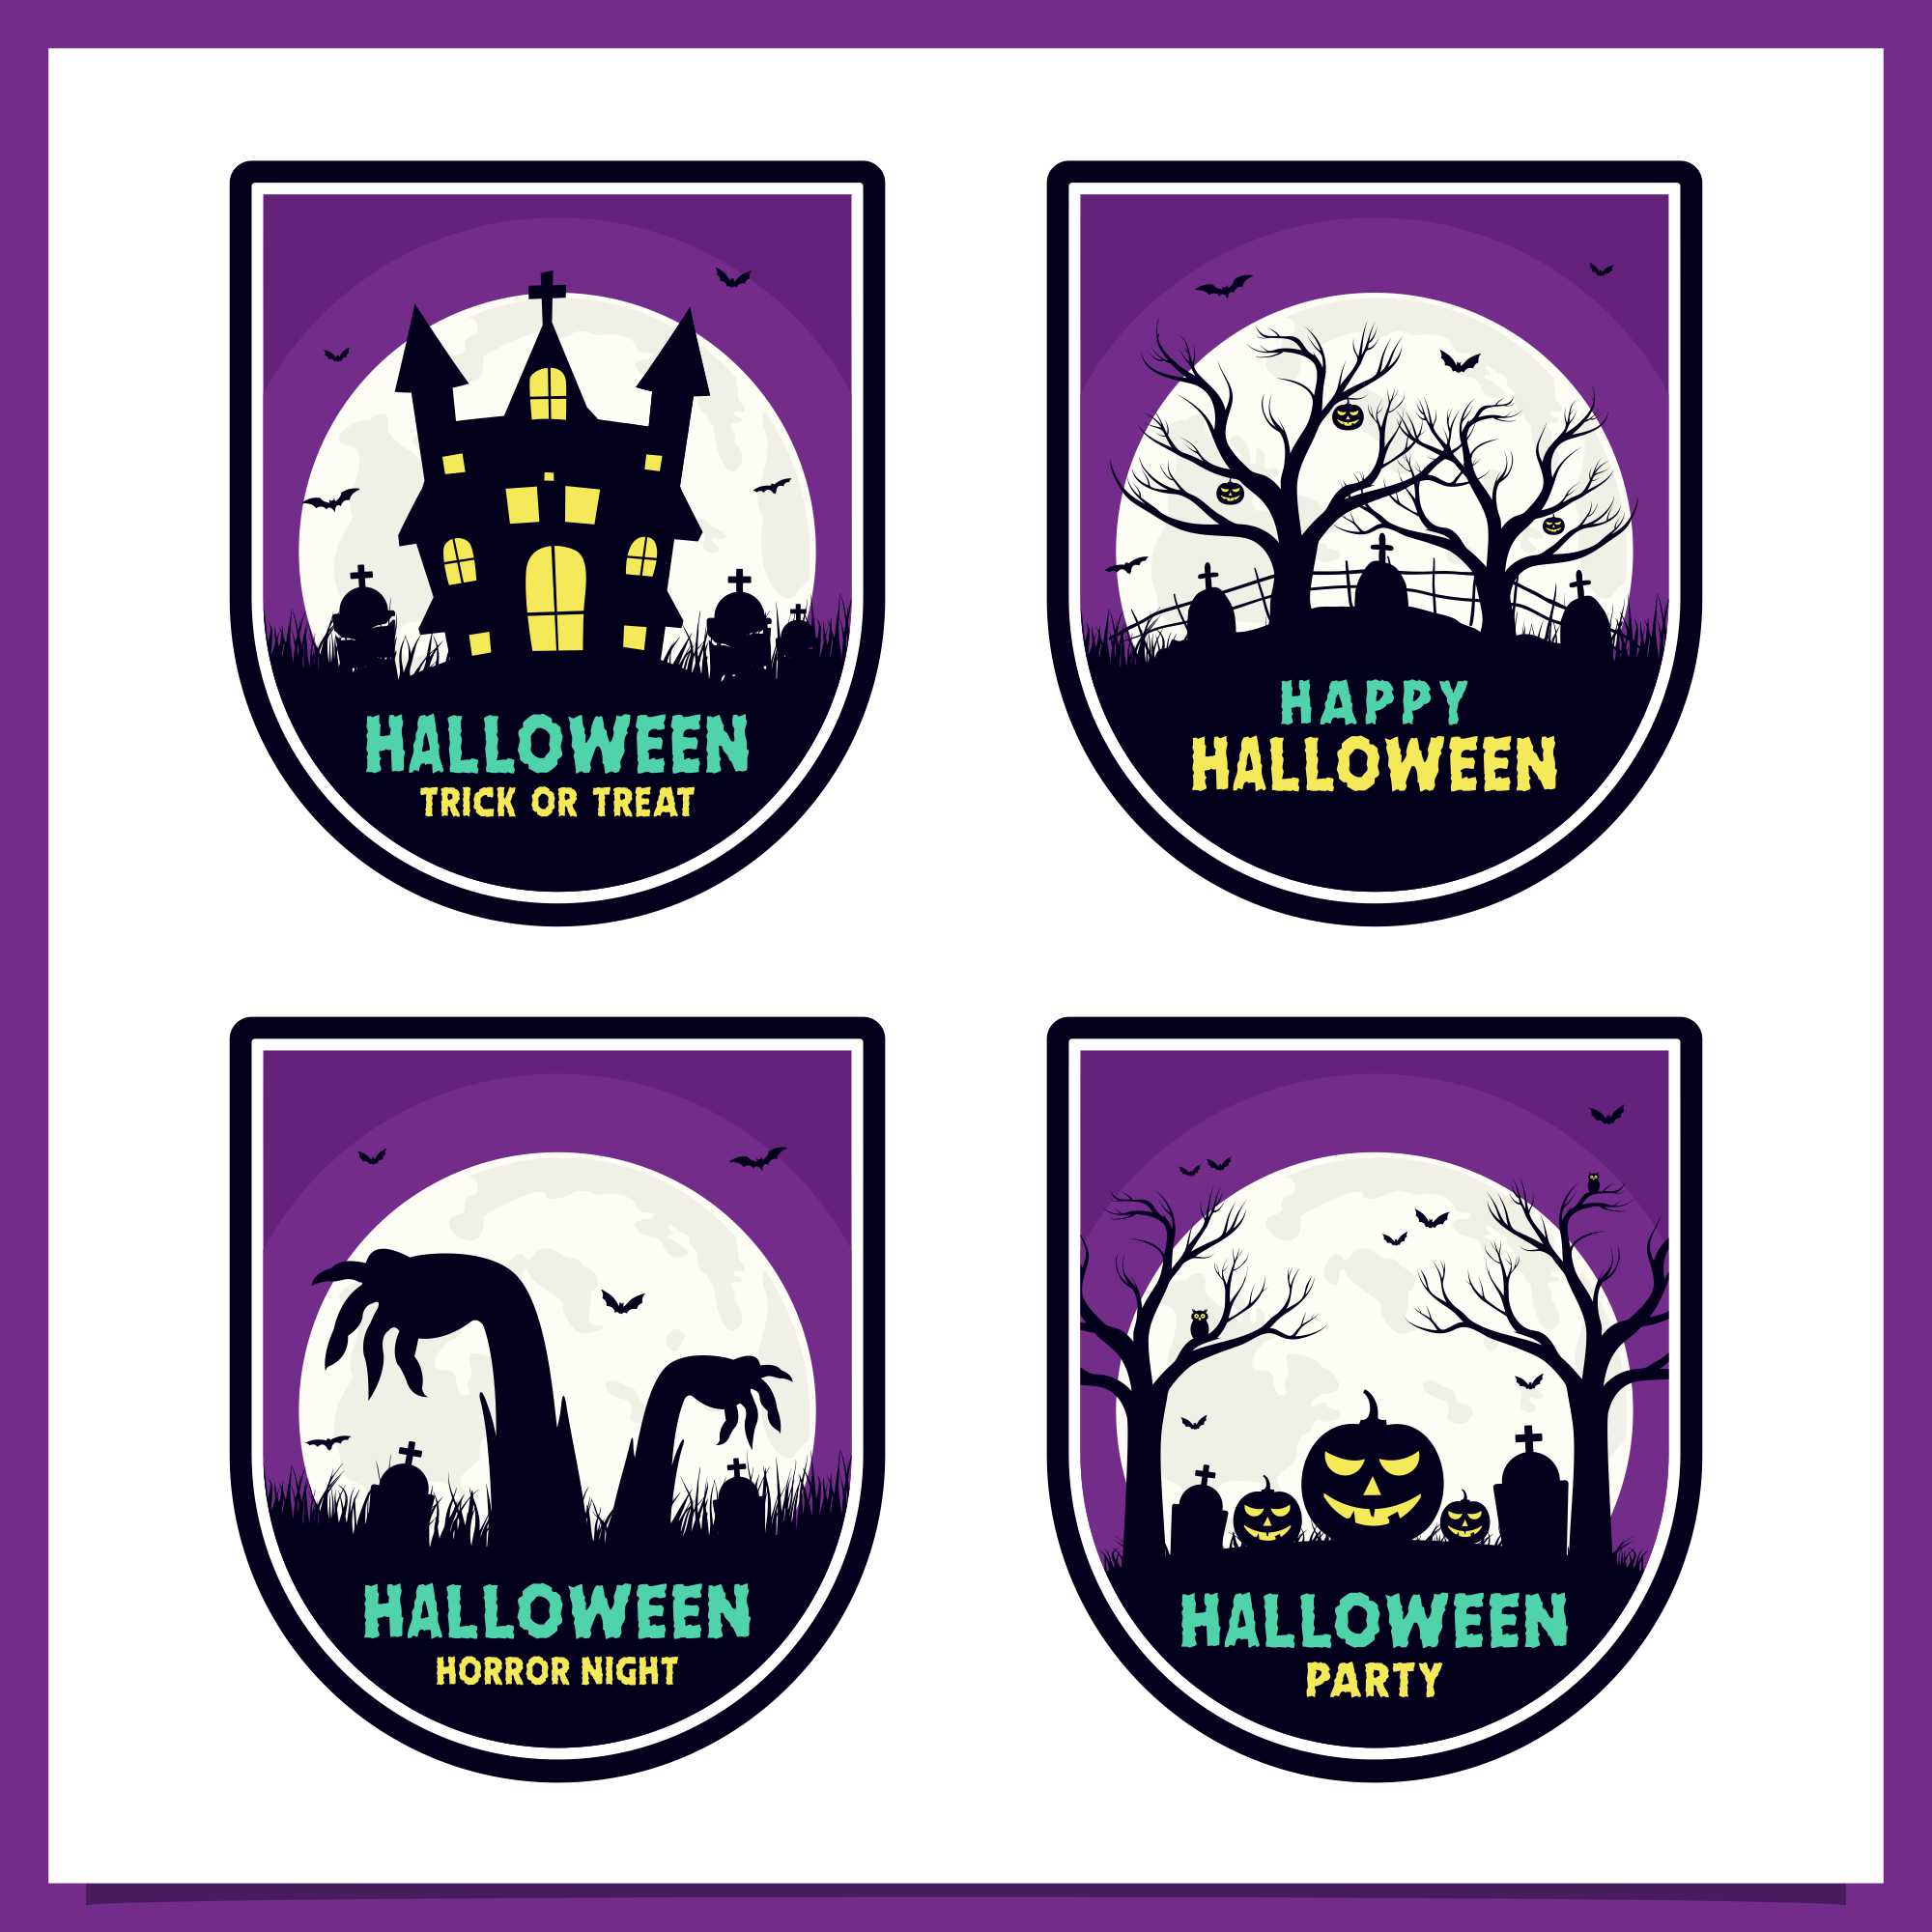 set Happy halloween badge design collection - $4 cover image.